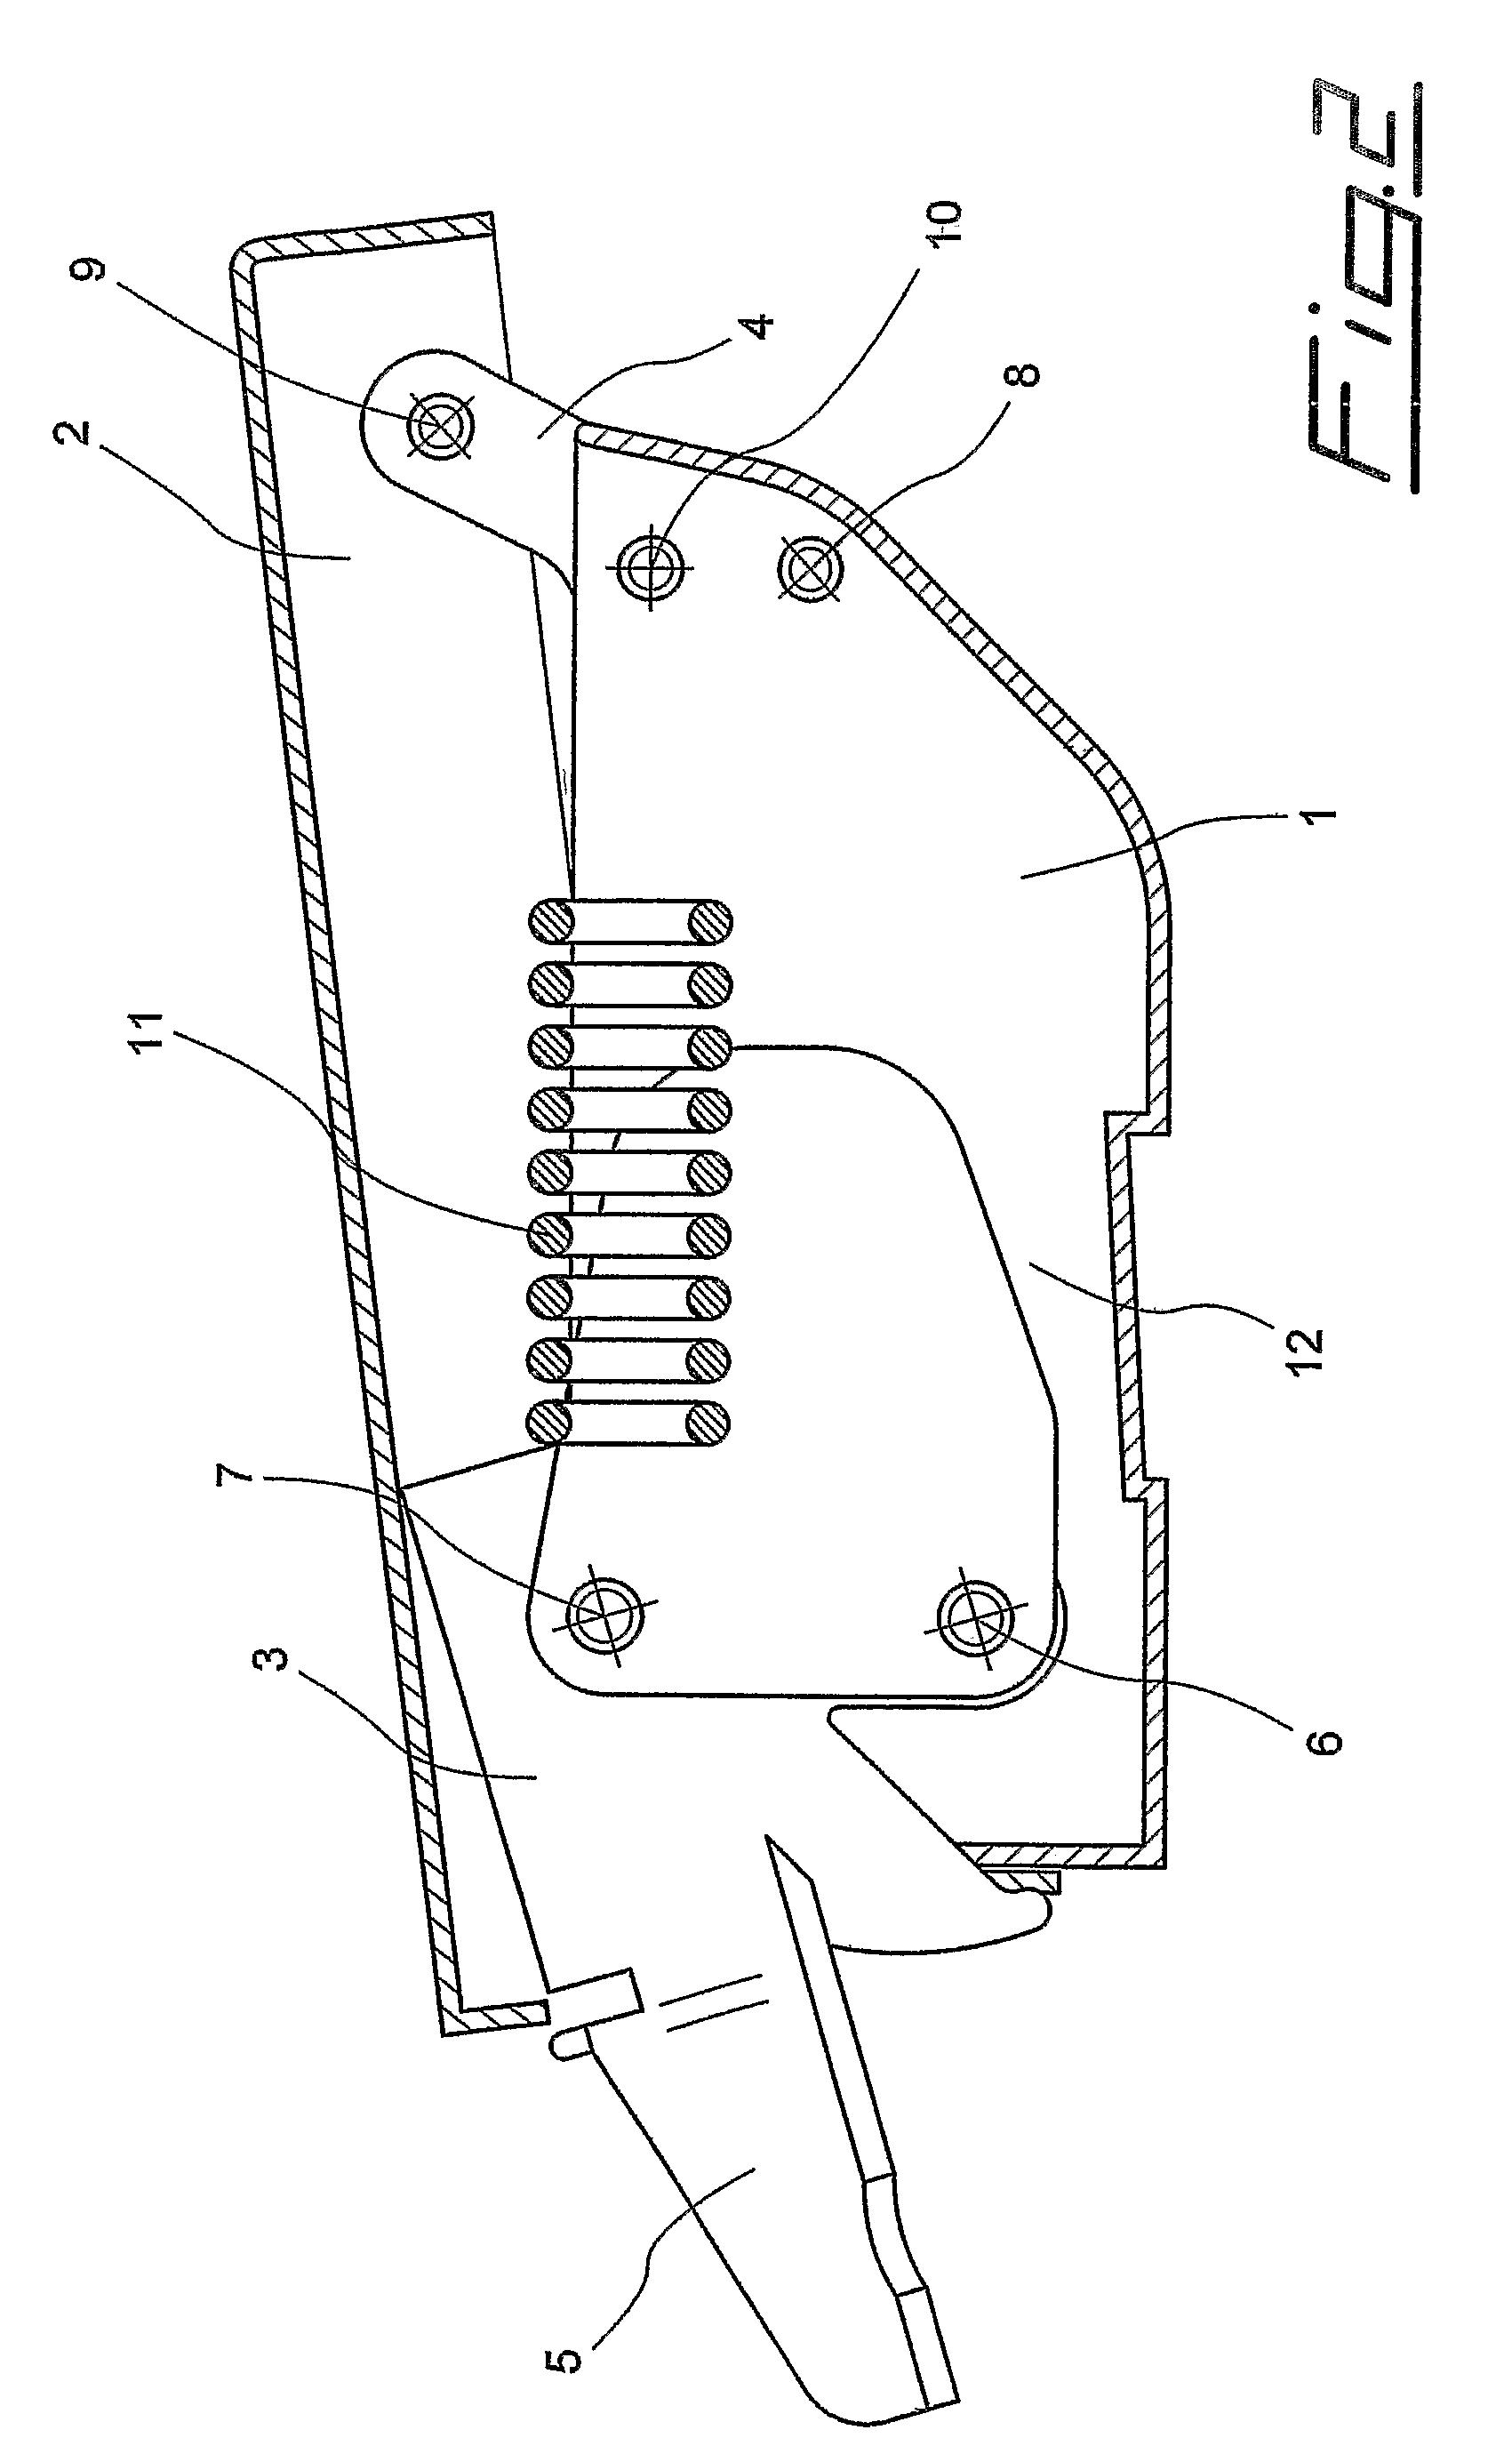 Device for synchronizing the tilt of a chair back and seat